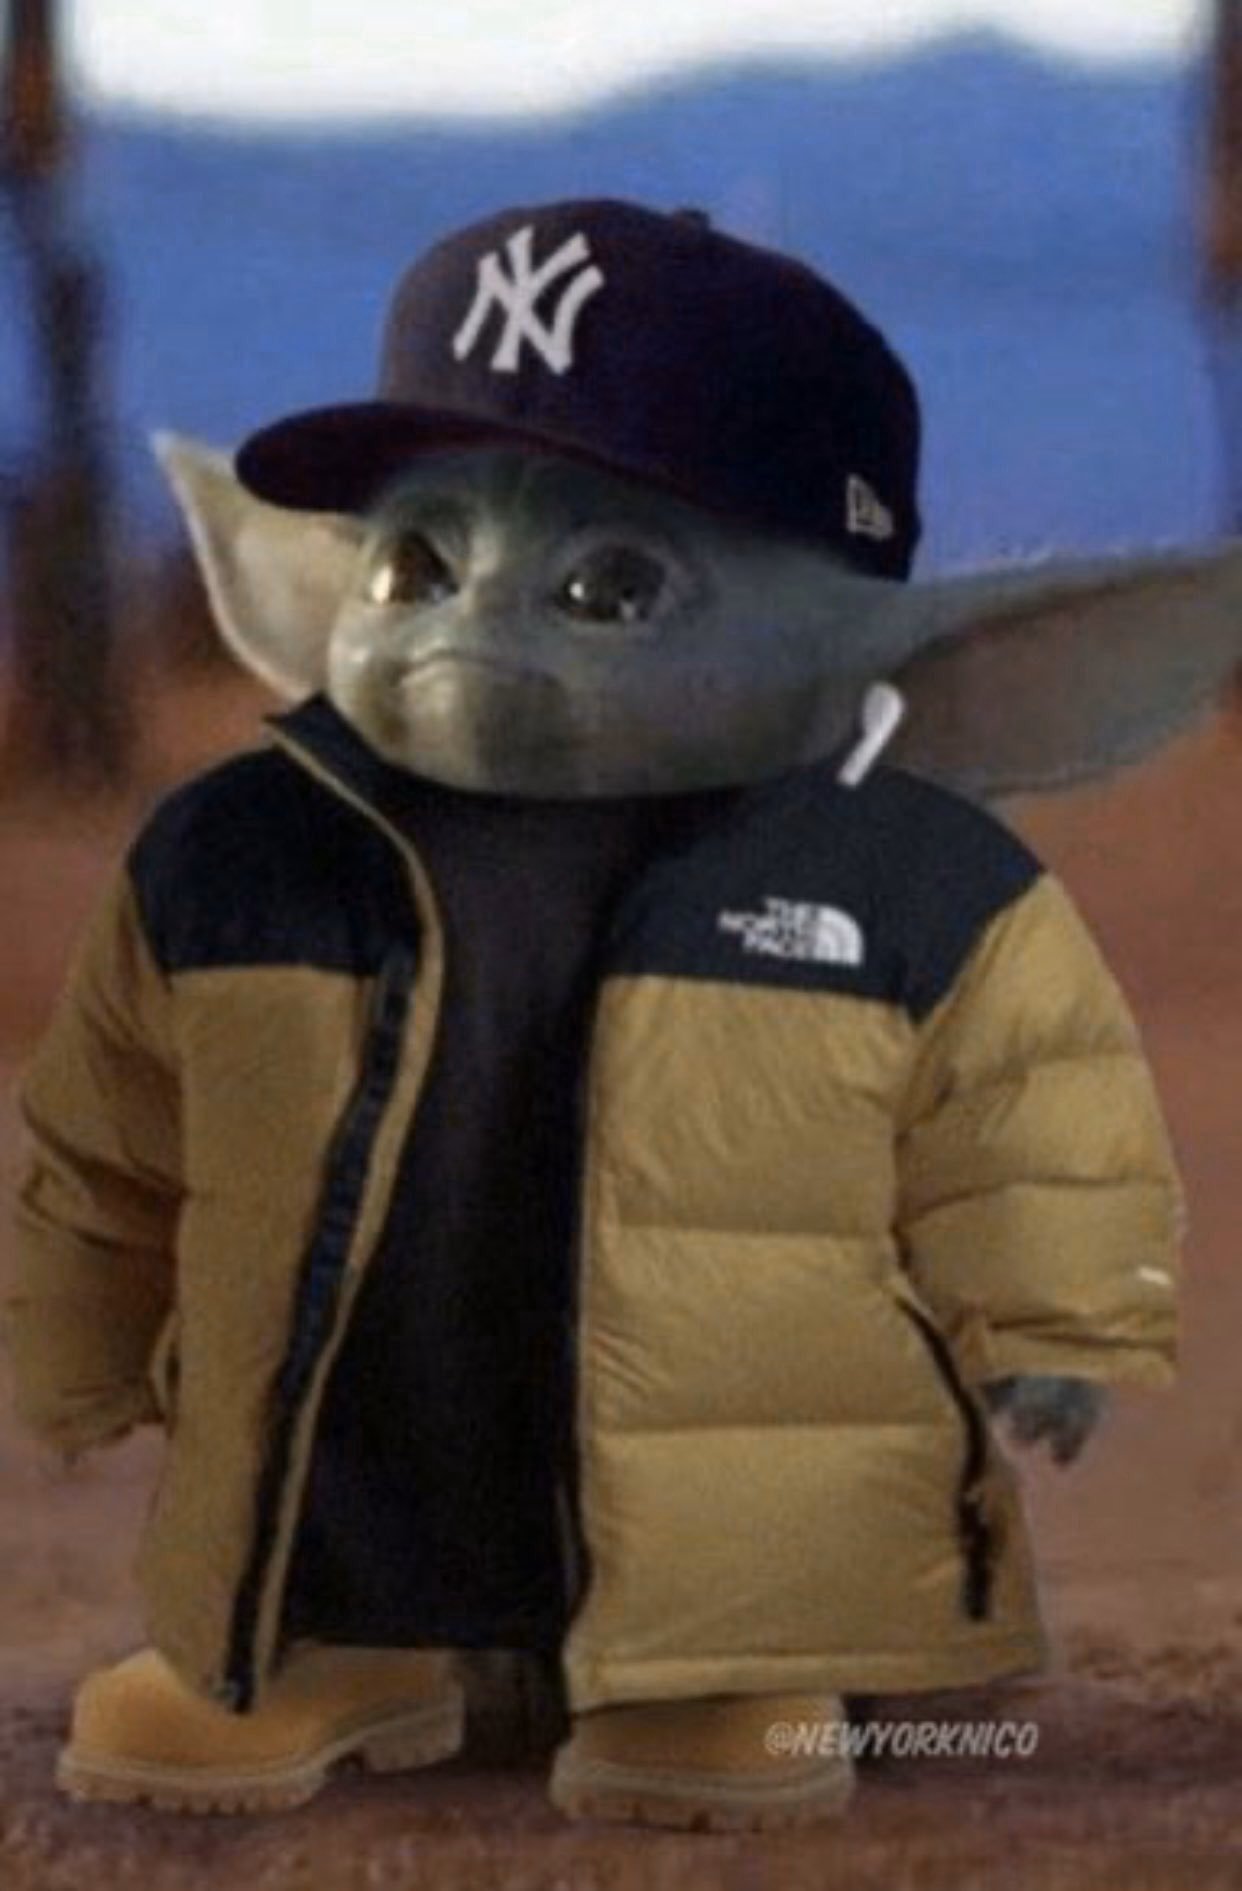 Ultra on X: @chaselyons normal yoda: absolutely no drip baby yoda:  airpods, timbs, Yankees hat, north face puffy coat drippin 💦💦💦   / X